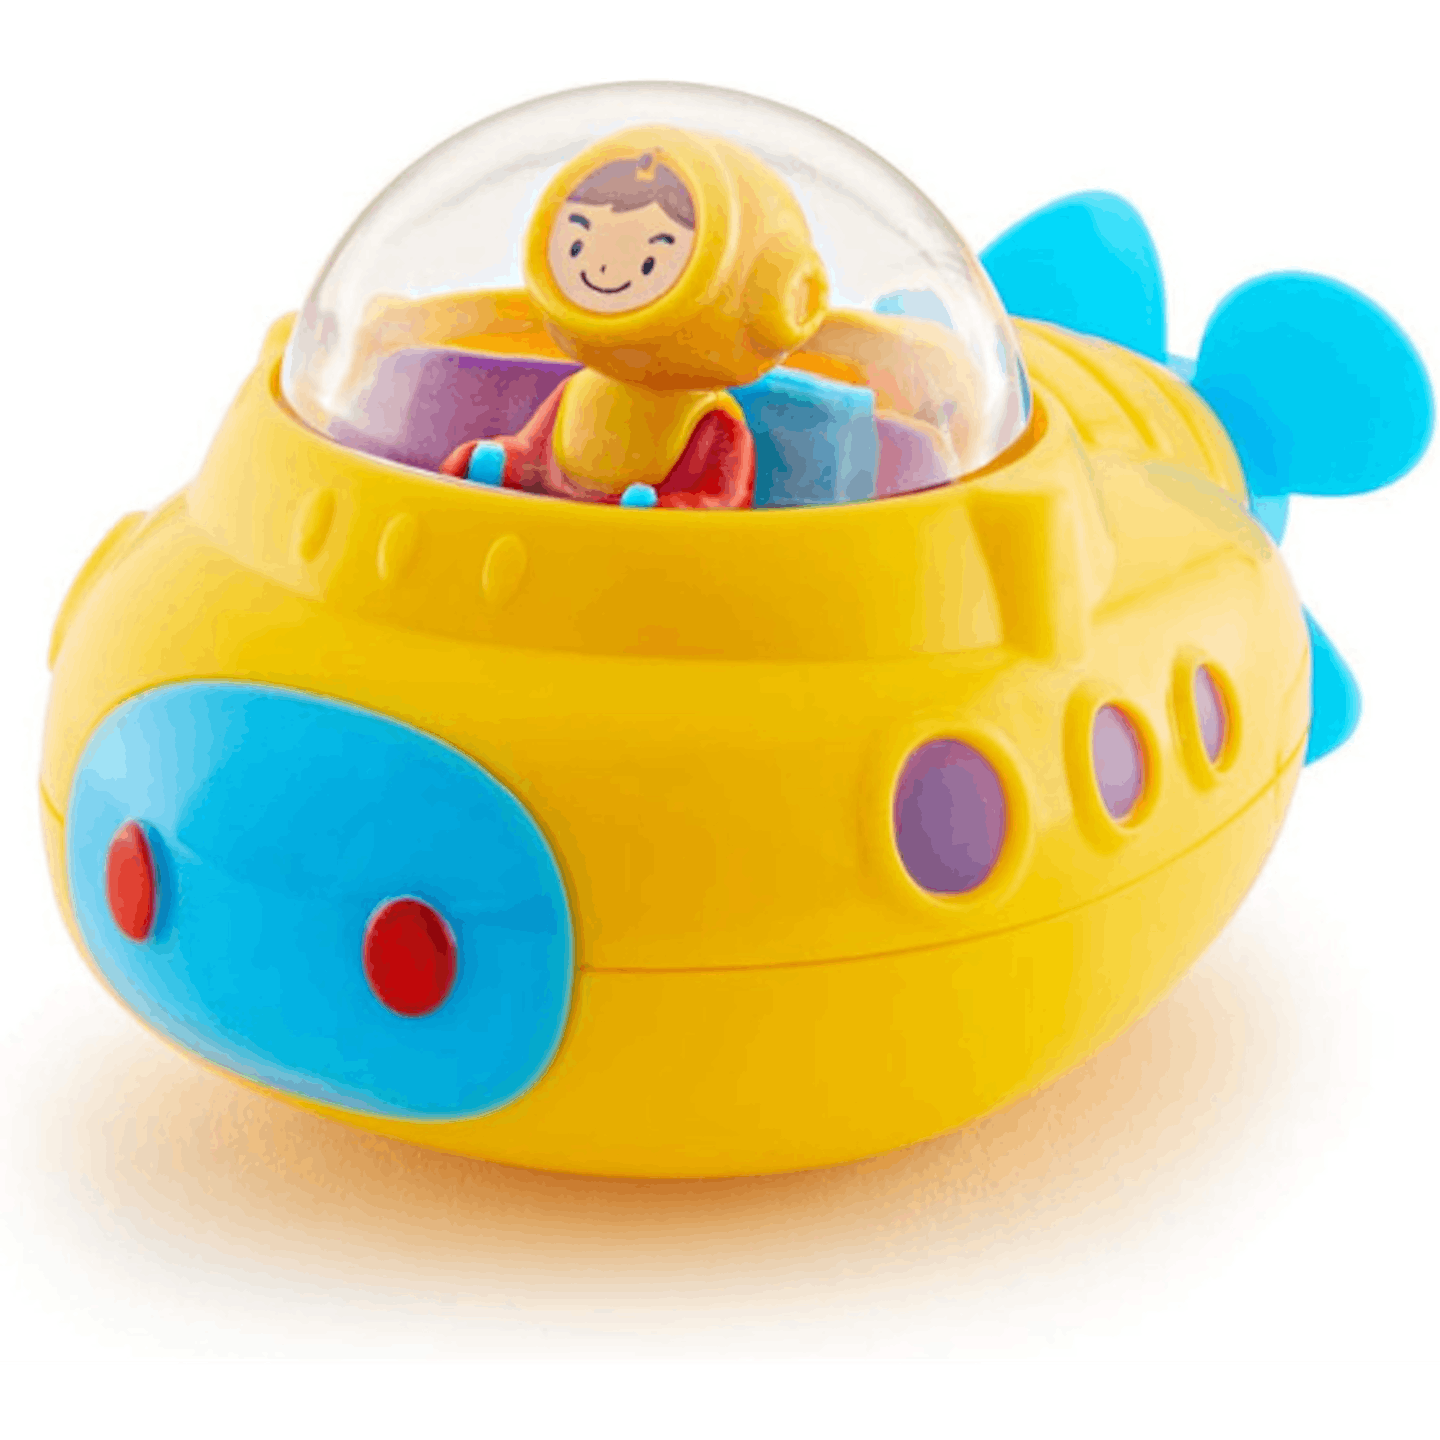 Top 10 Bath Toys For 2 Year Olds